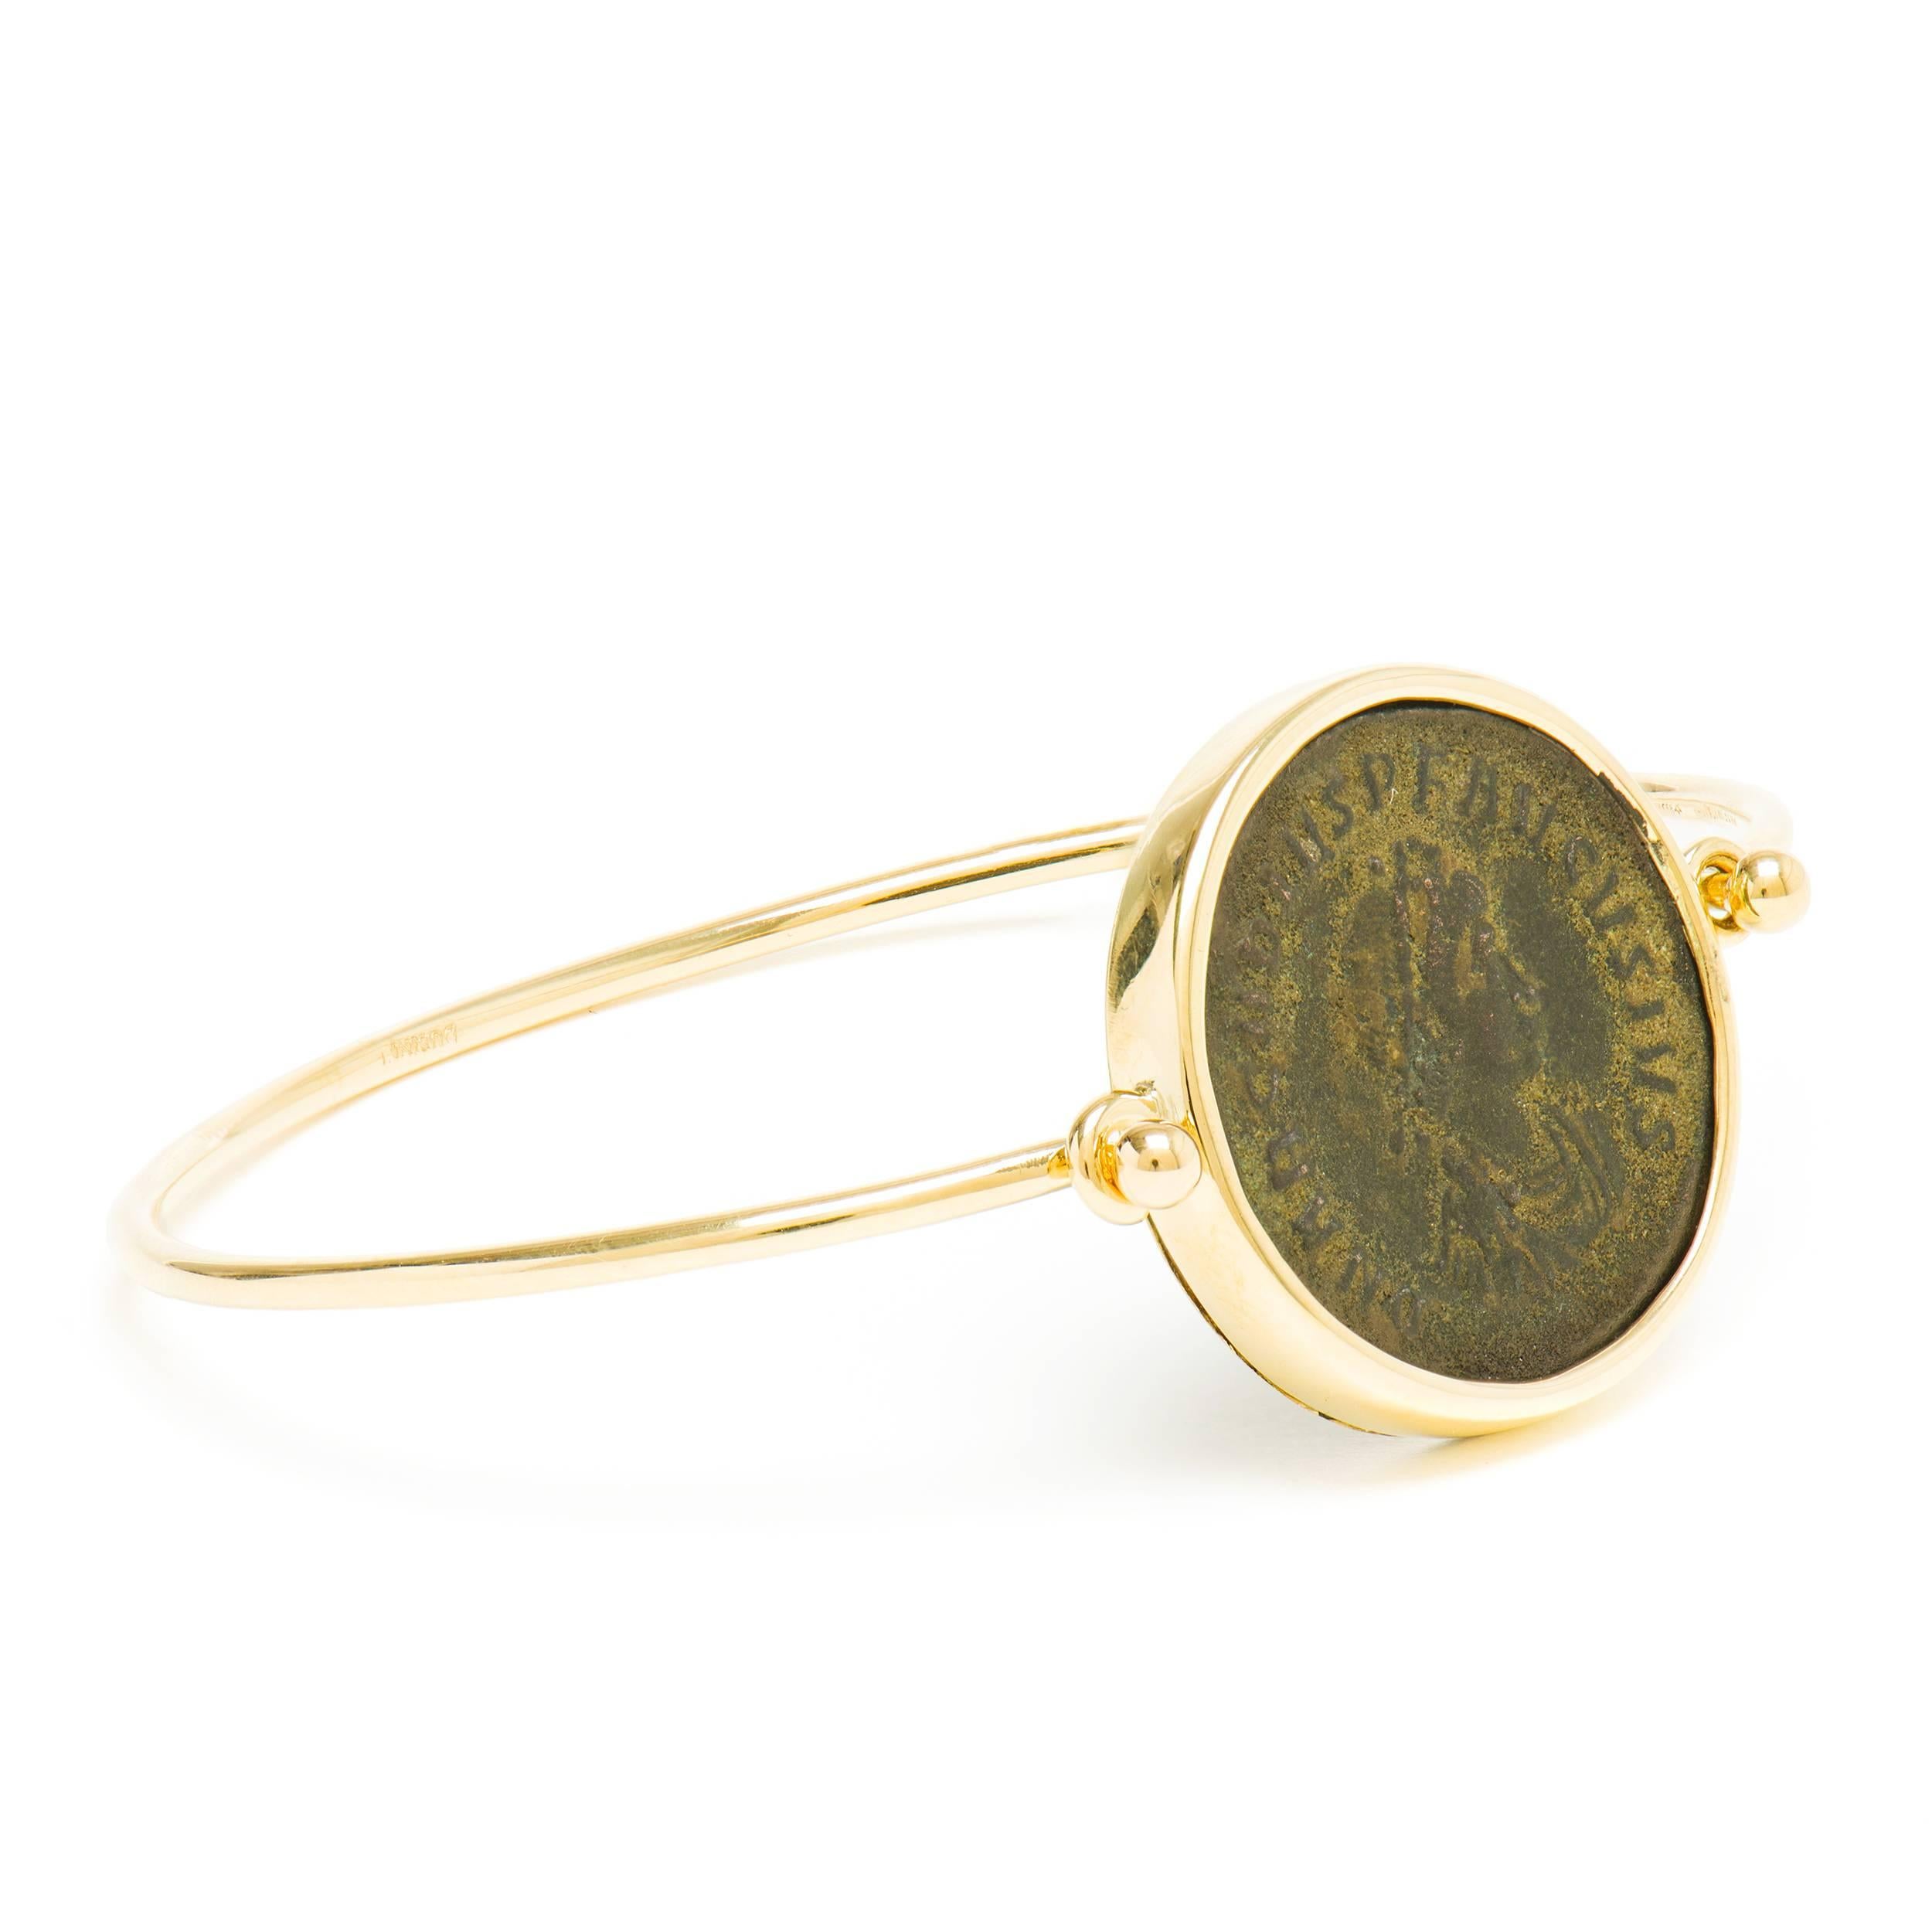 This DUBINI coin bracelet from the 'Empires' collection features an authentic Roman Imperial bronze coin set in 18K yellow gold.

* Due to the unique process of hand carving coins in ancient times, there may be a few stylistic differences from the